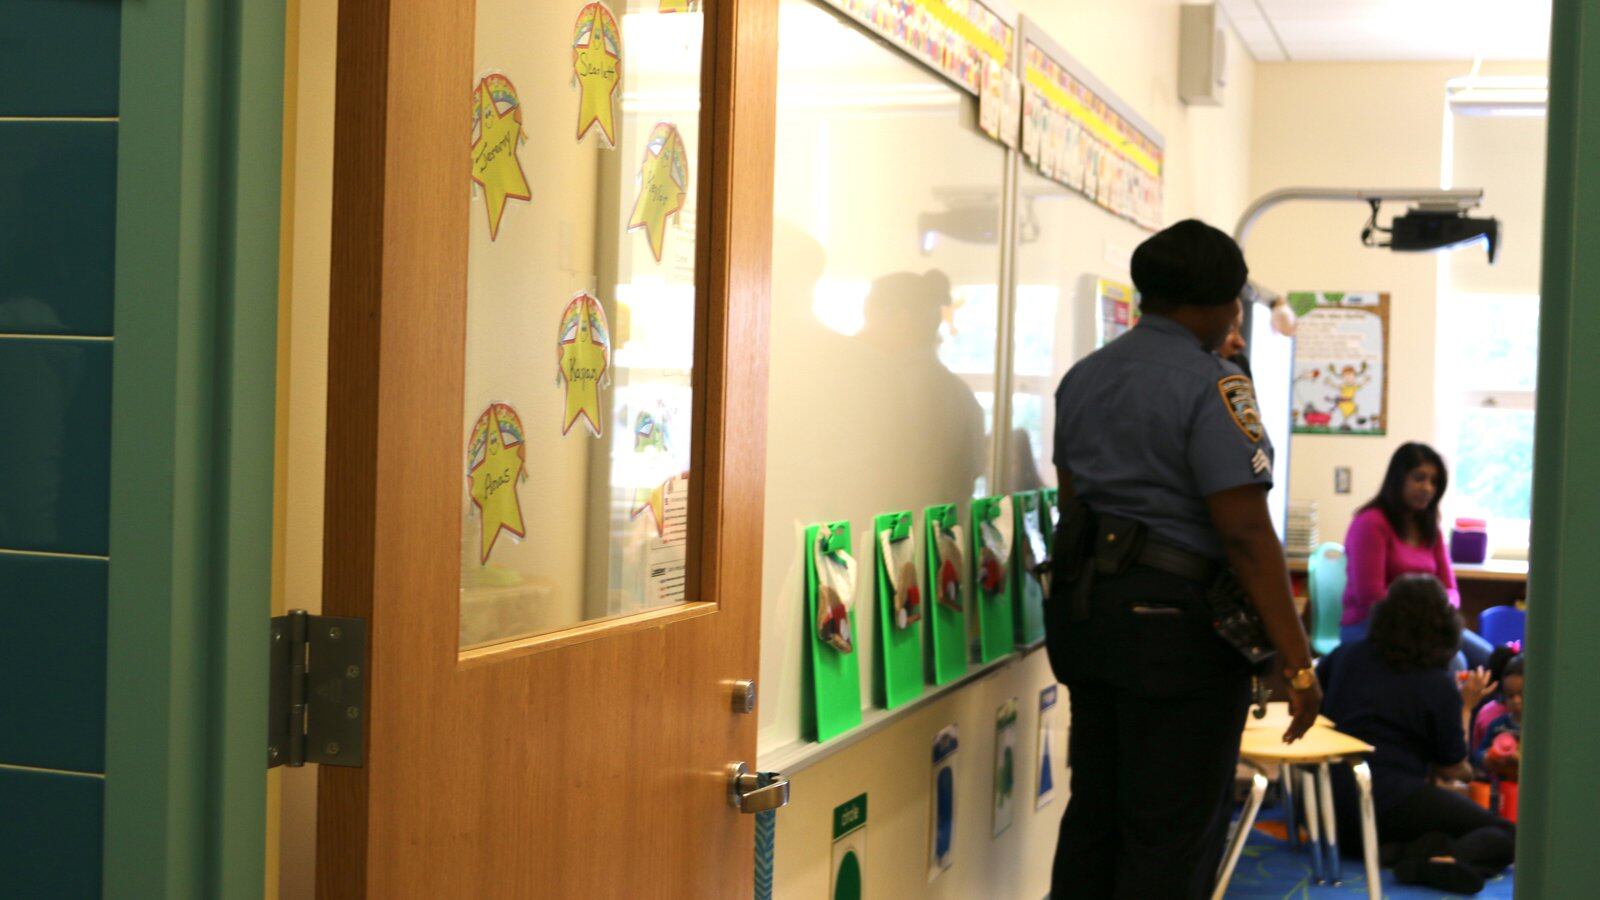 A member of the New York Police Department visits a classroom at Queens Explorers Elementary School.